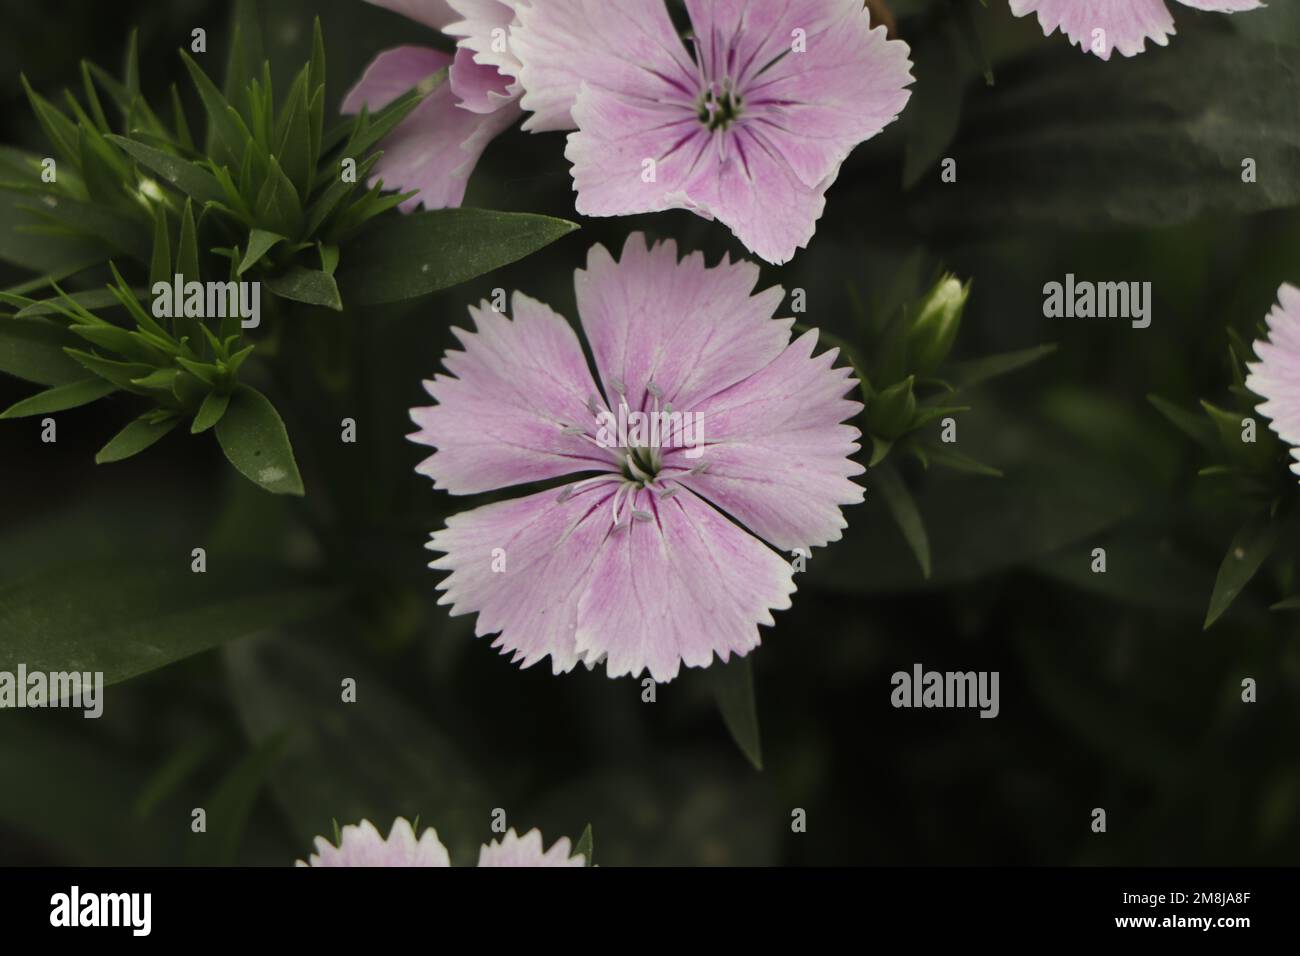 Dianthus plumarius or cultivar 'Ipswich Pinks' flowers with blue green leaves are popular garden plant. Stock Photo